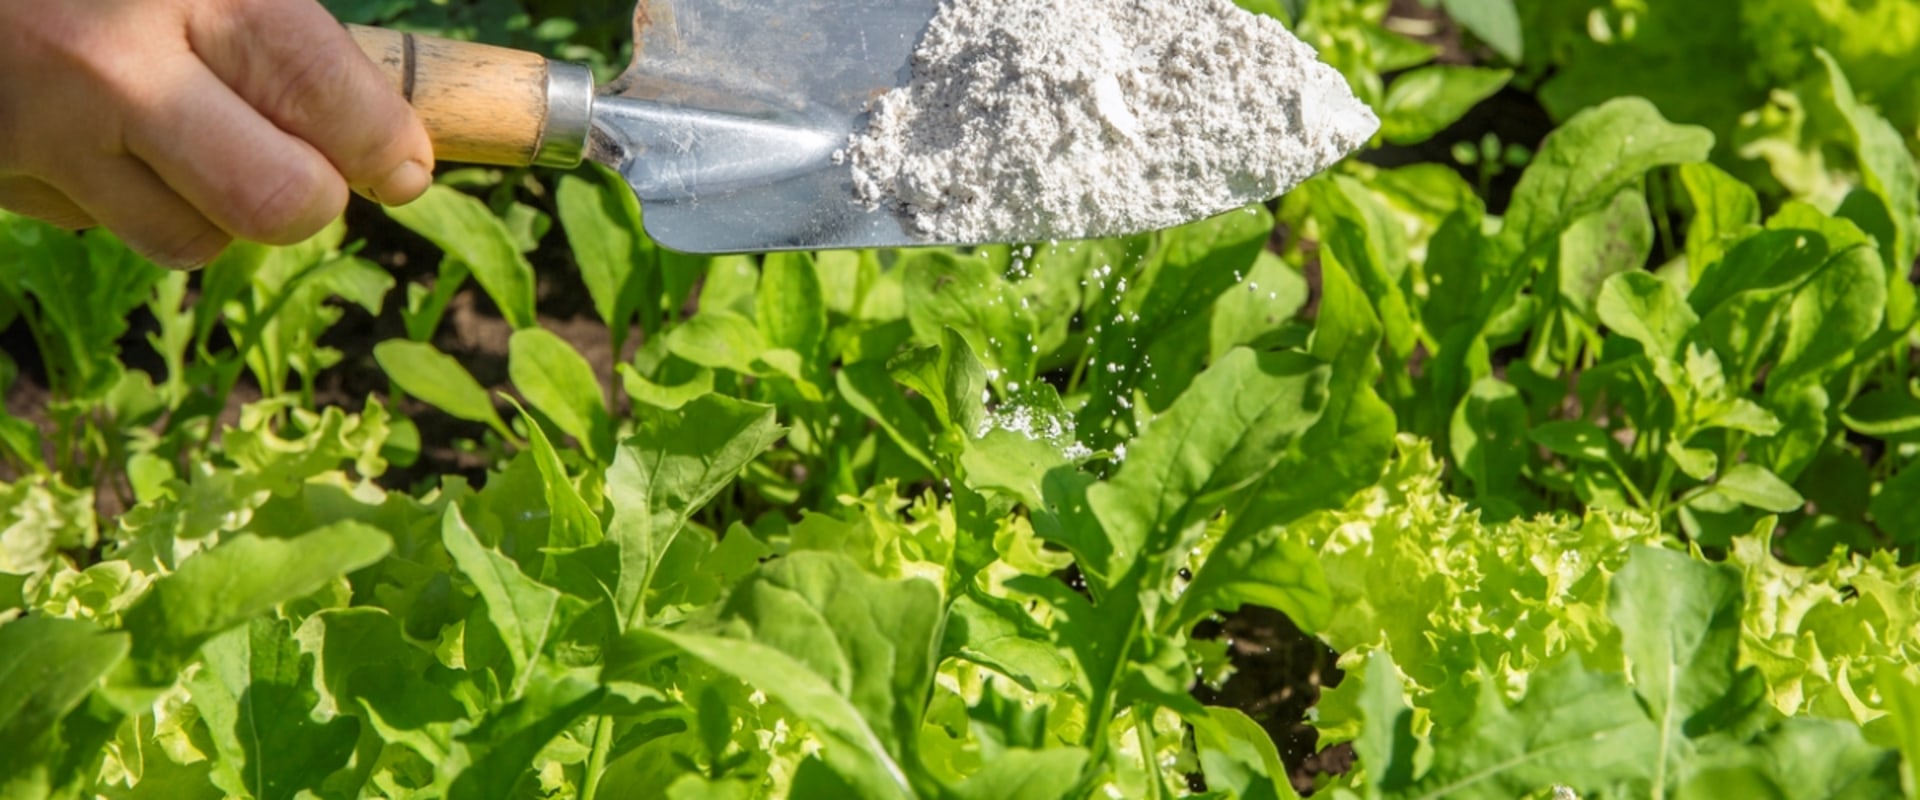 Using Natural Methods for Pest Control in Your Garden